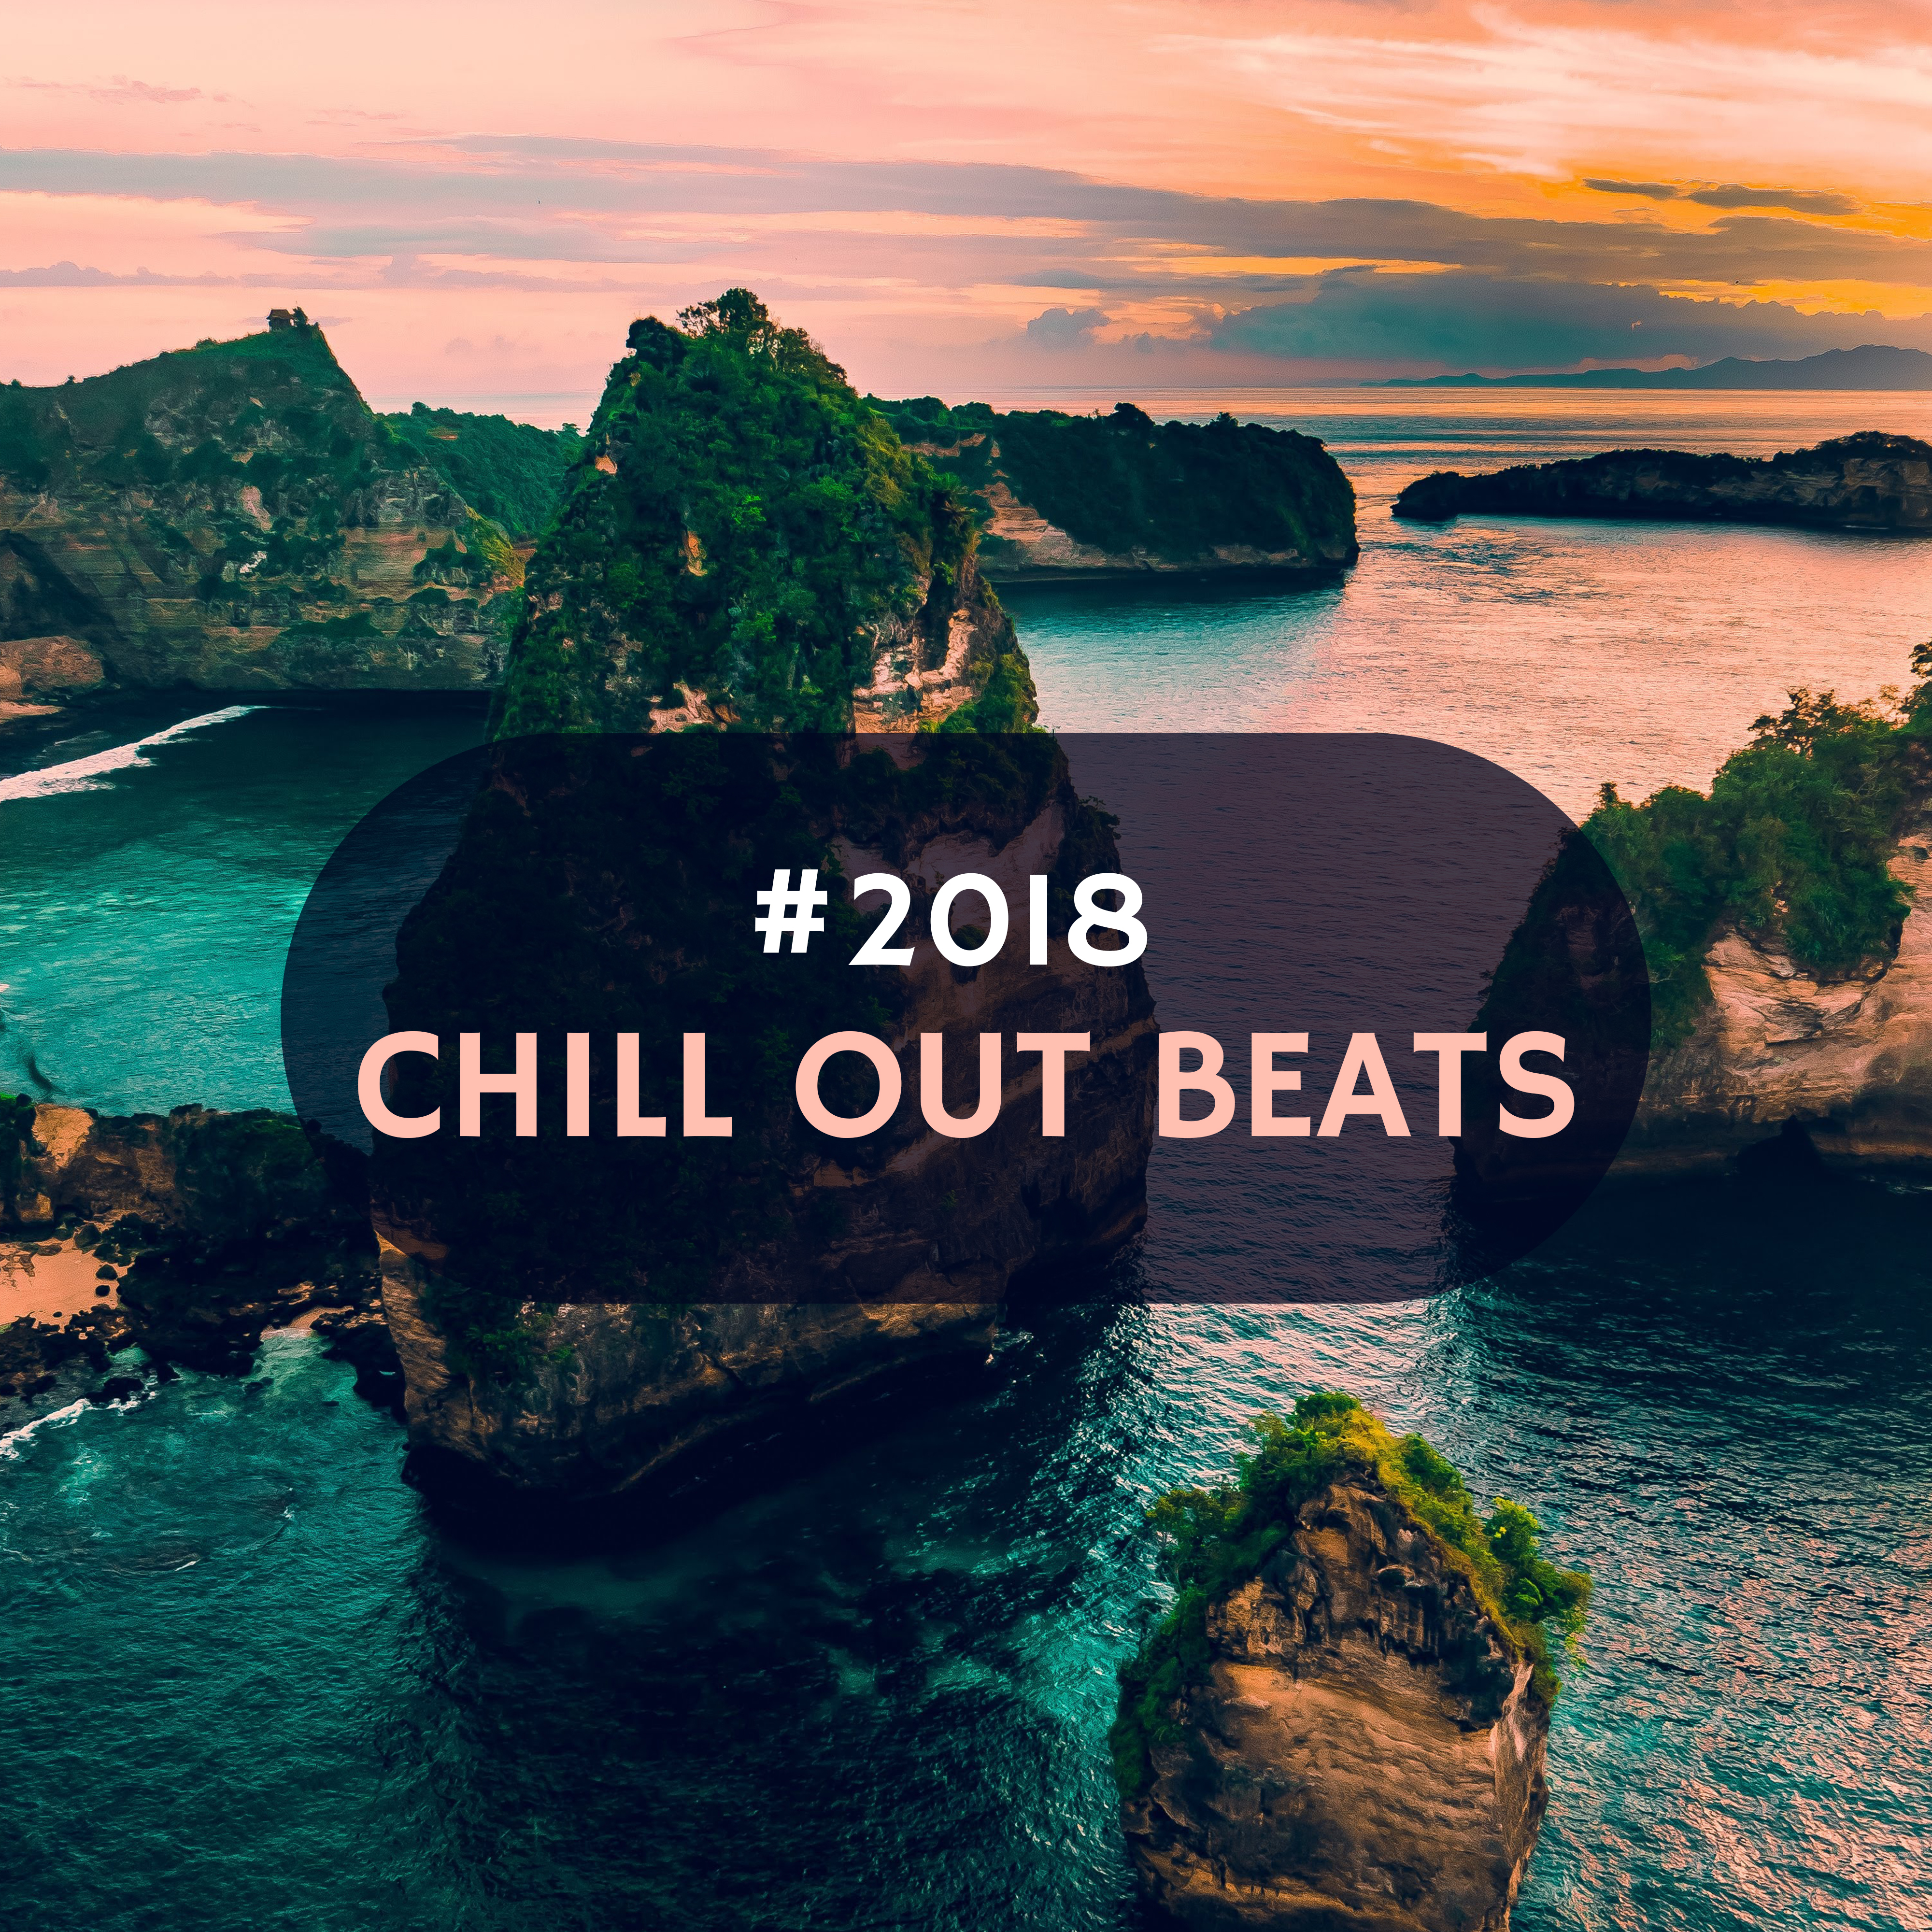 #2018 Chill Out Beats